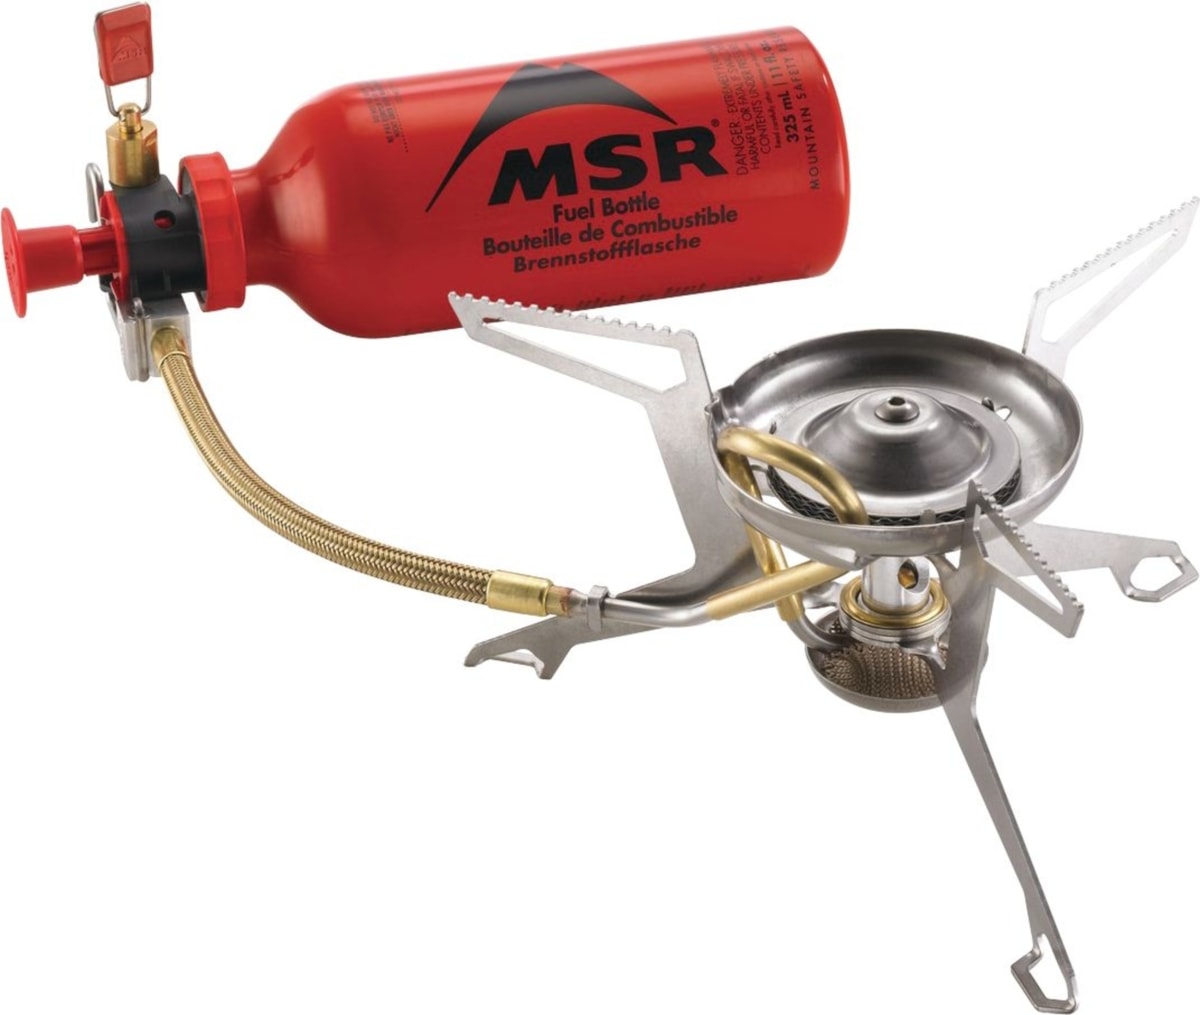 msr whisperlite camping stove for cold weather